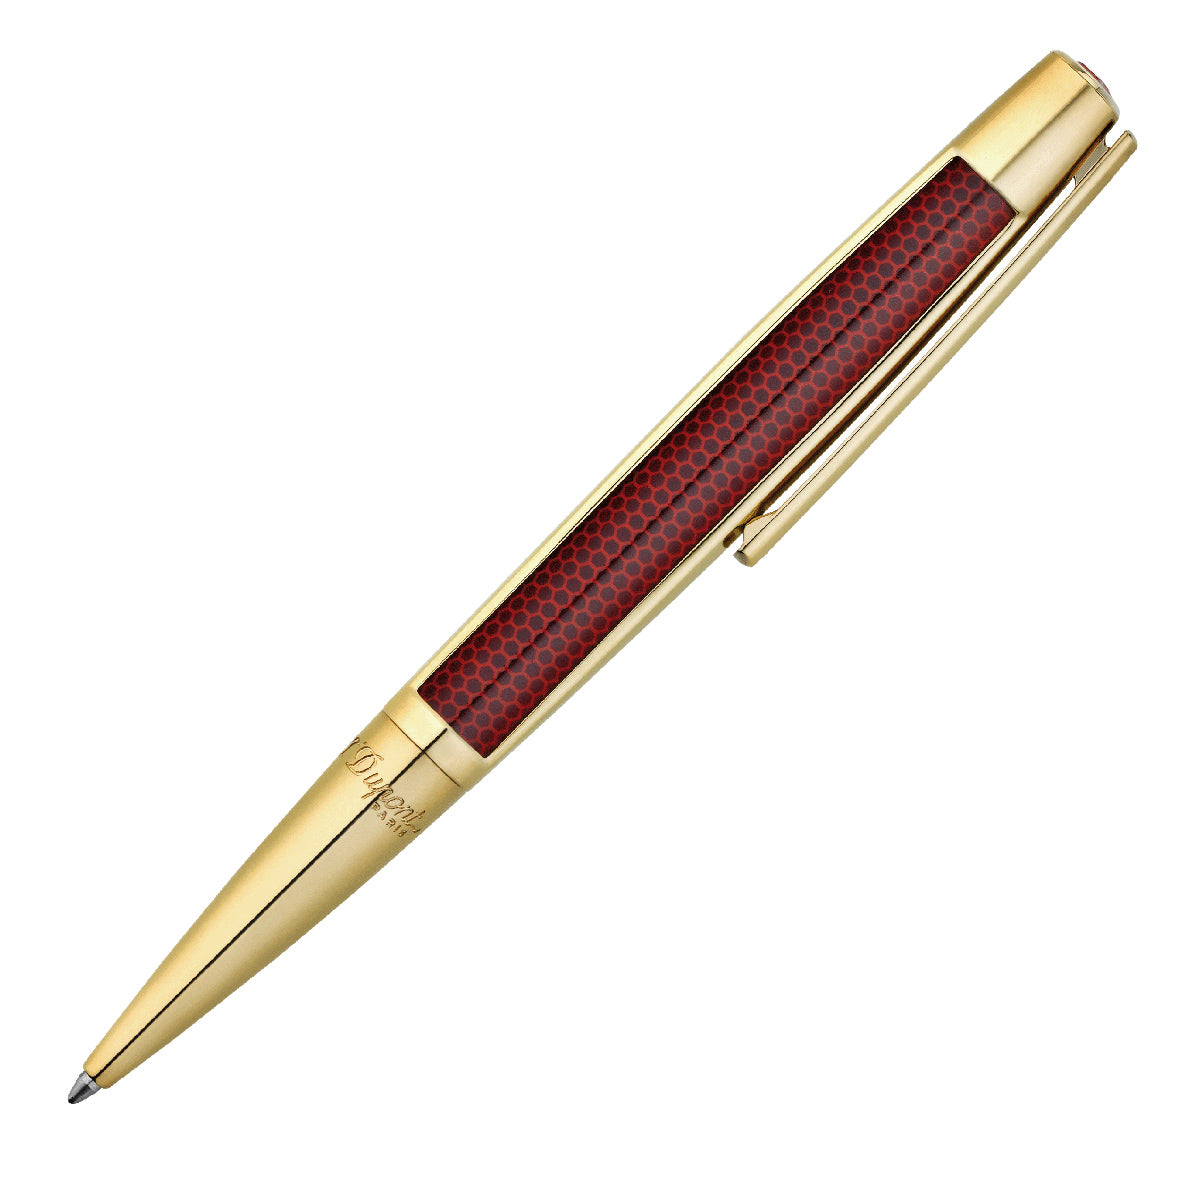 Dupont Defi Iron Man and Tony Stark Ballpoint Pen Red and Gold 405720